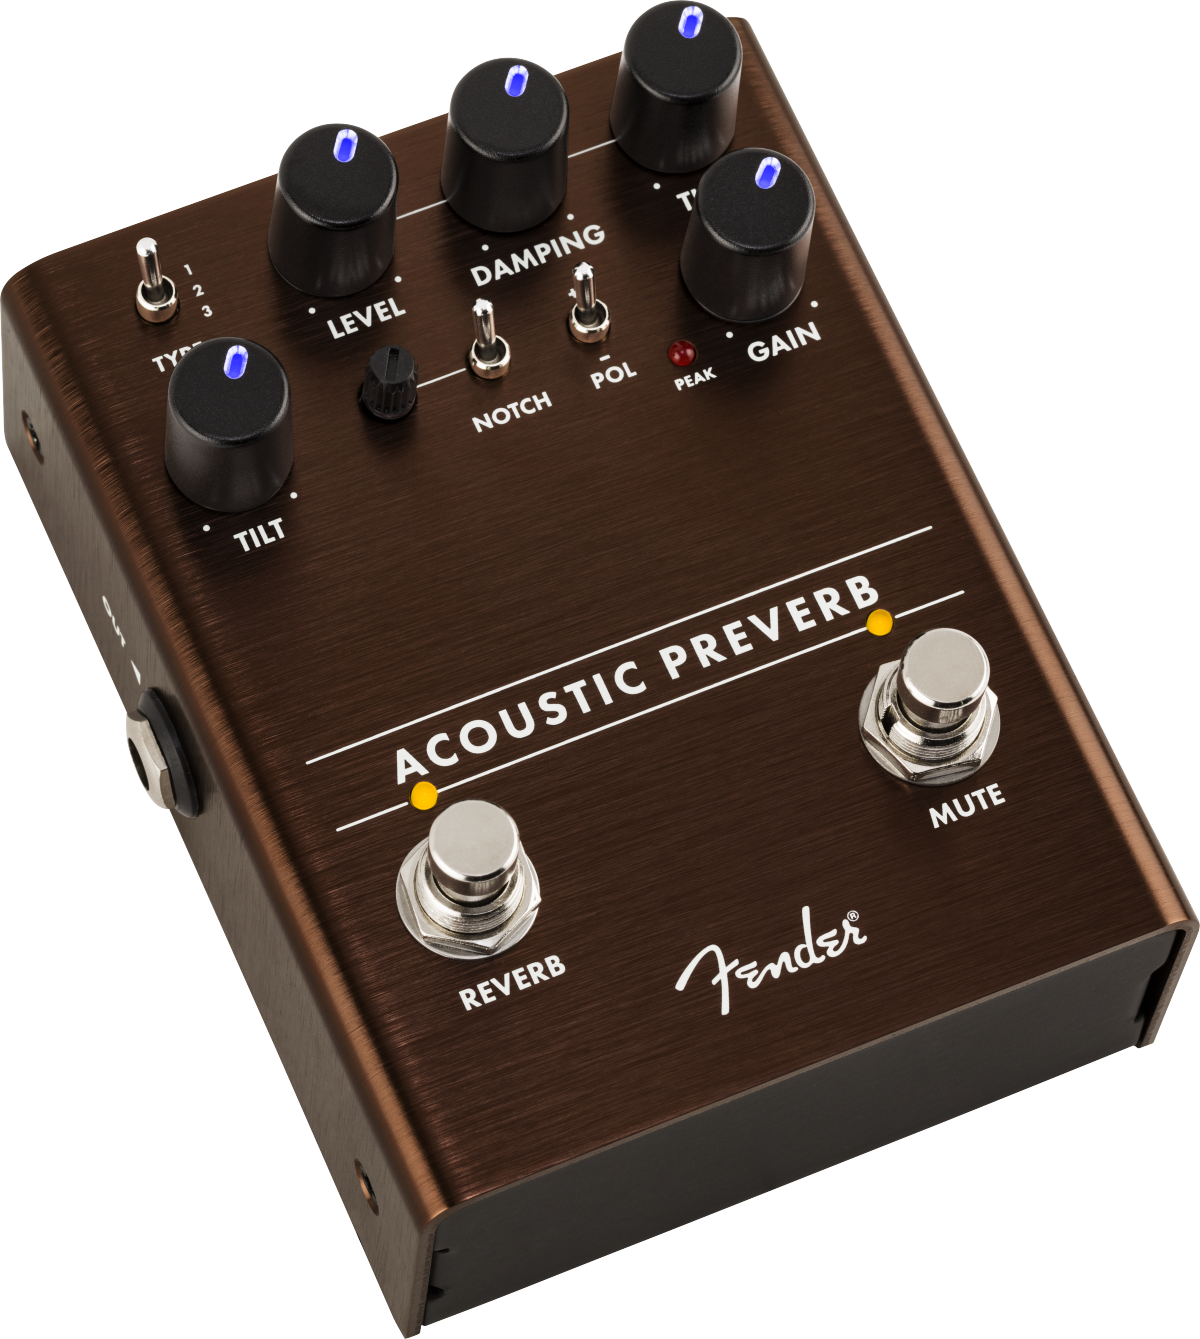 Fender Acoustic Preverb - Reverb/delay/echo effect pedaal - Main picture